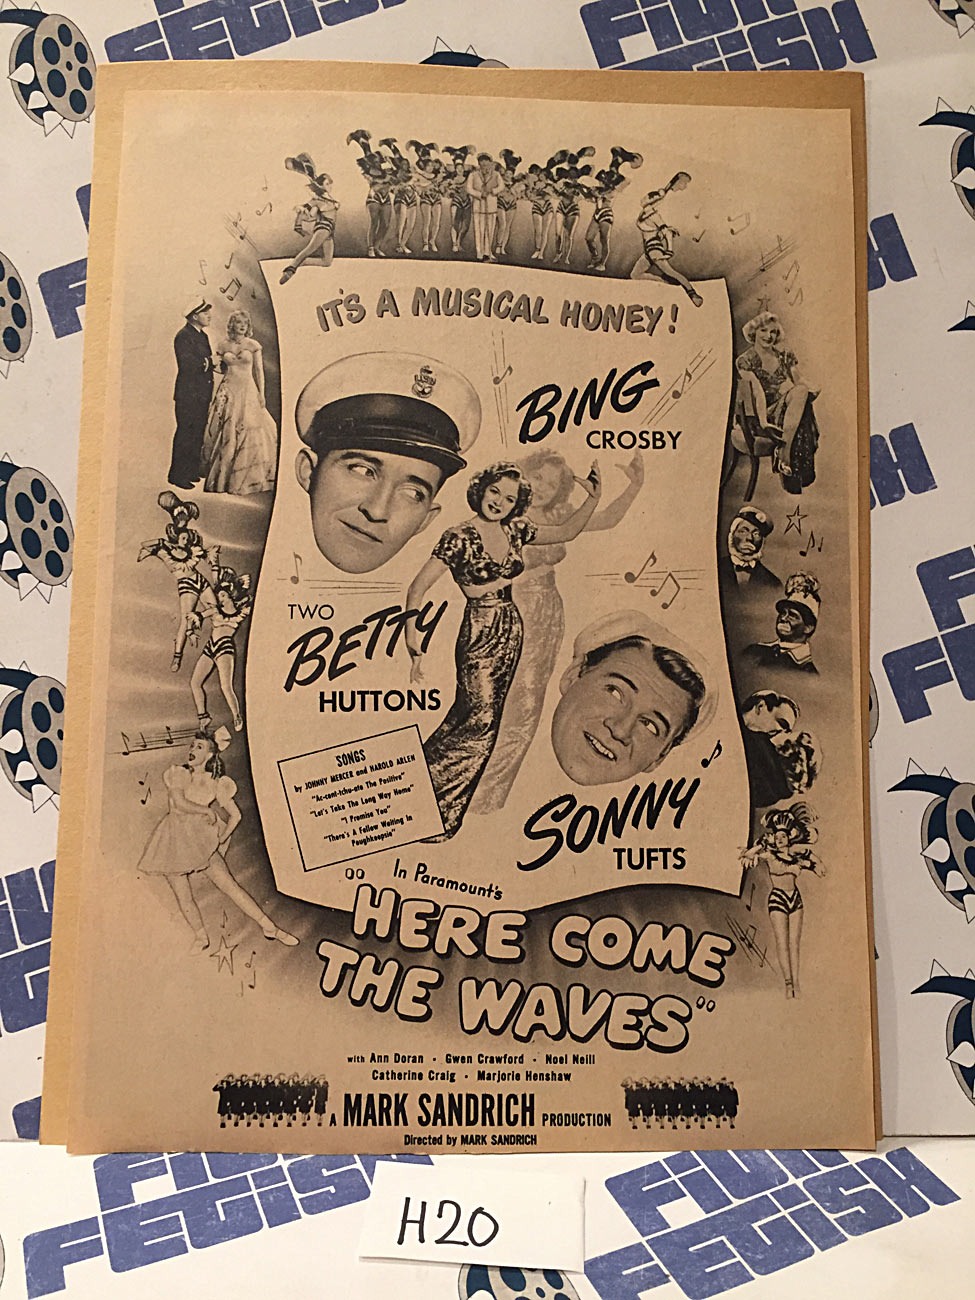 Here Come the Waves 1944 Original Full-Page Magazine Ad Bing Crosby  Betty Hutton  H20